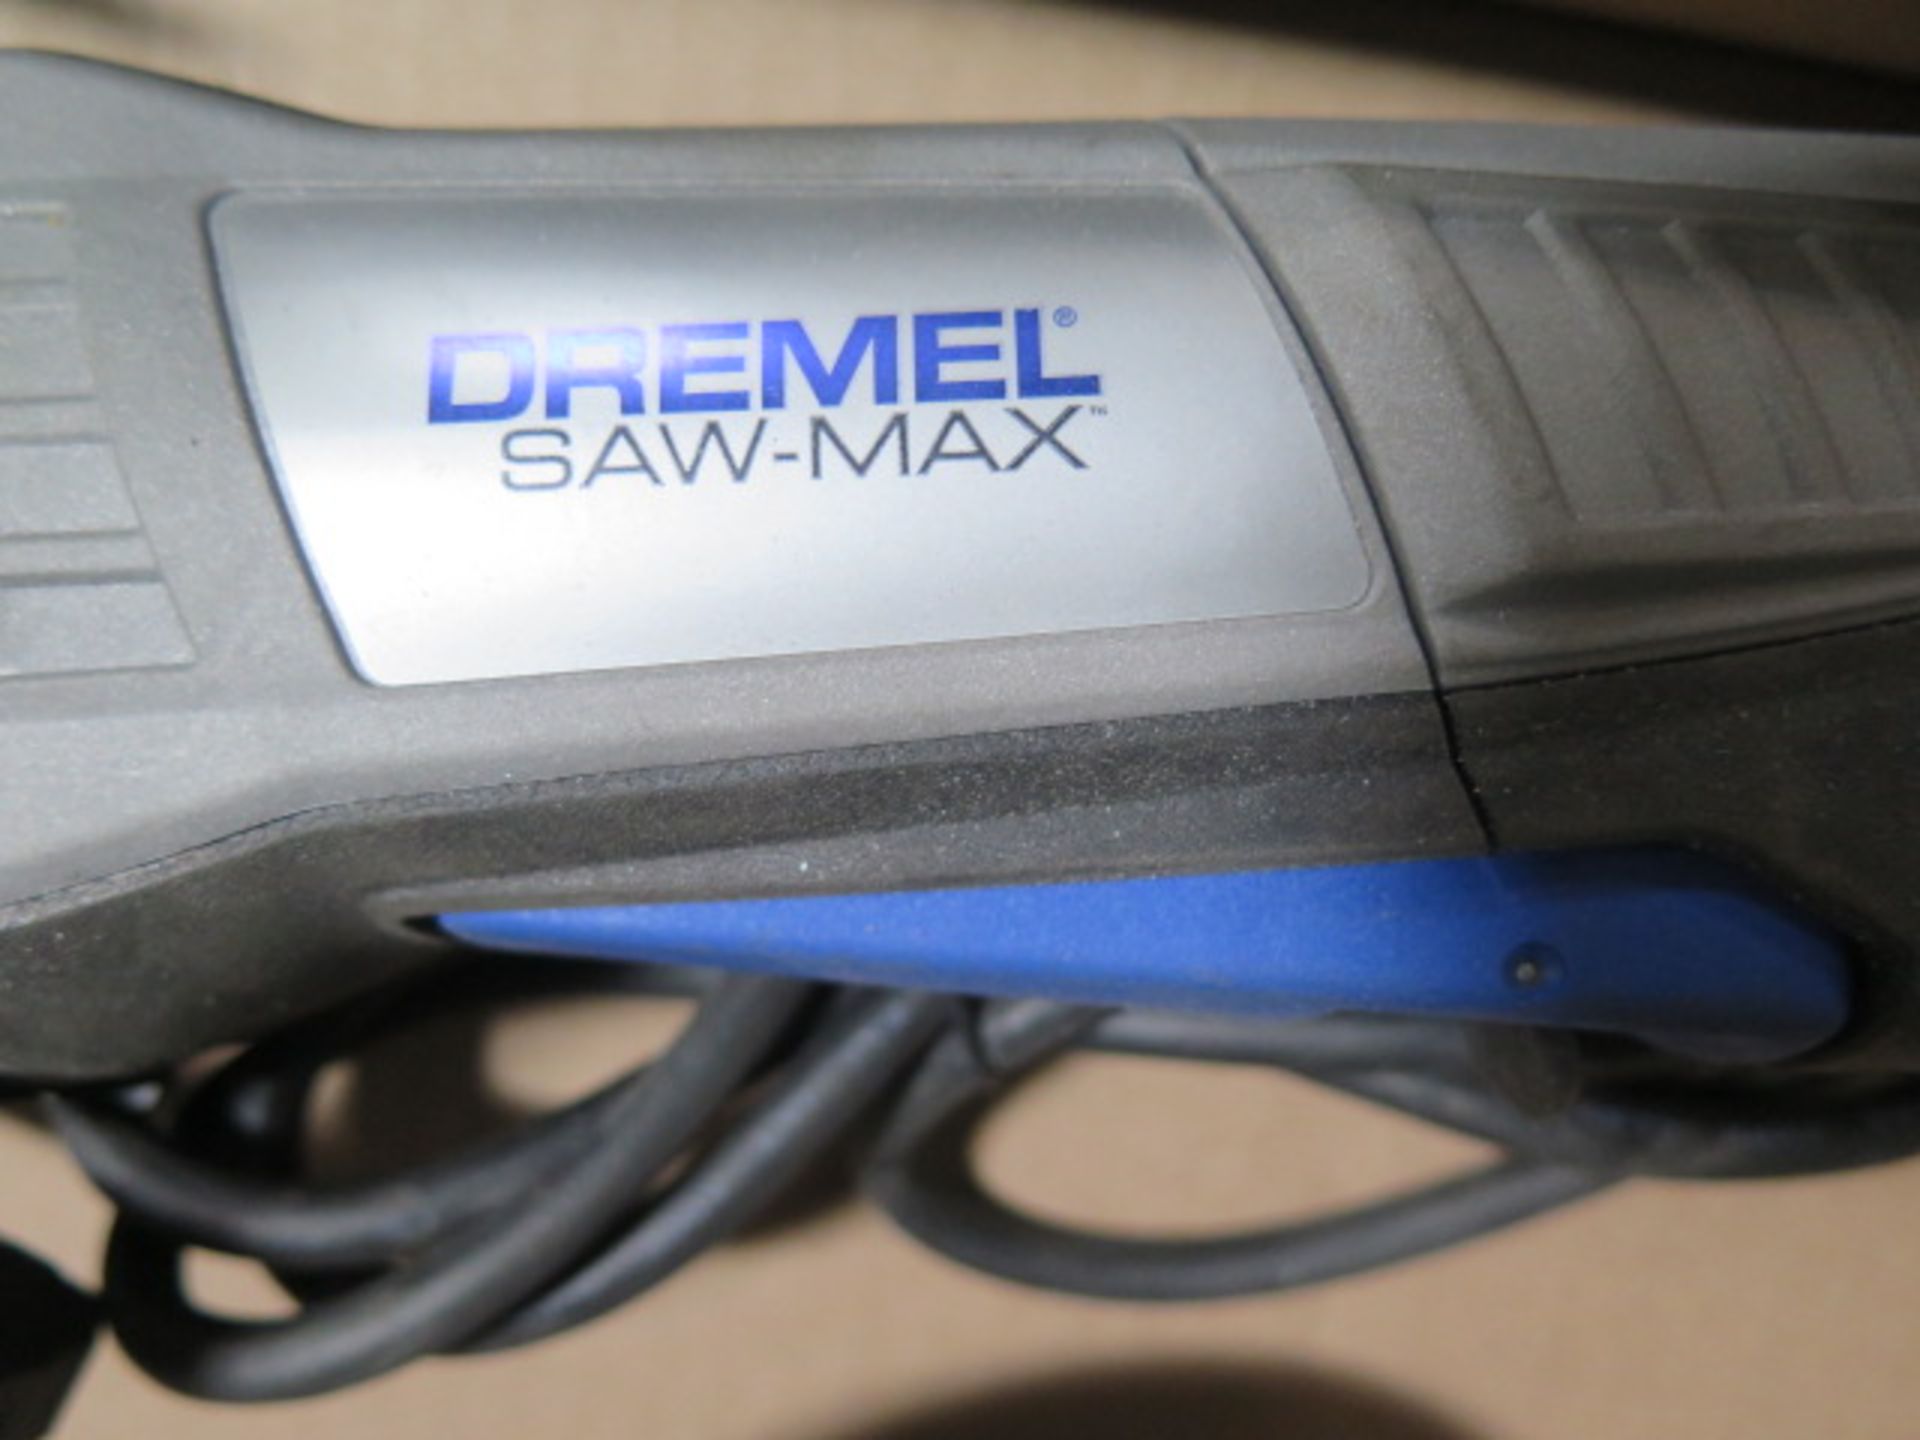 Craftsman Router and Dremel Saw-Max Circular Saw (SOLD AS-IS - NO WARRANTY) - Image 6 of 6